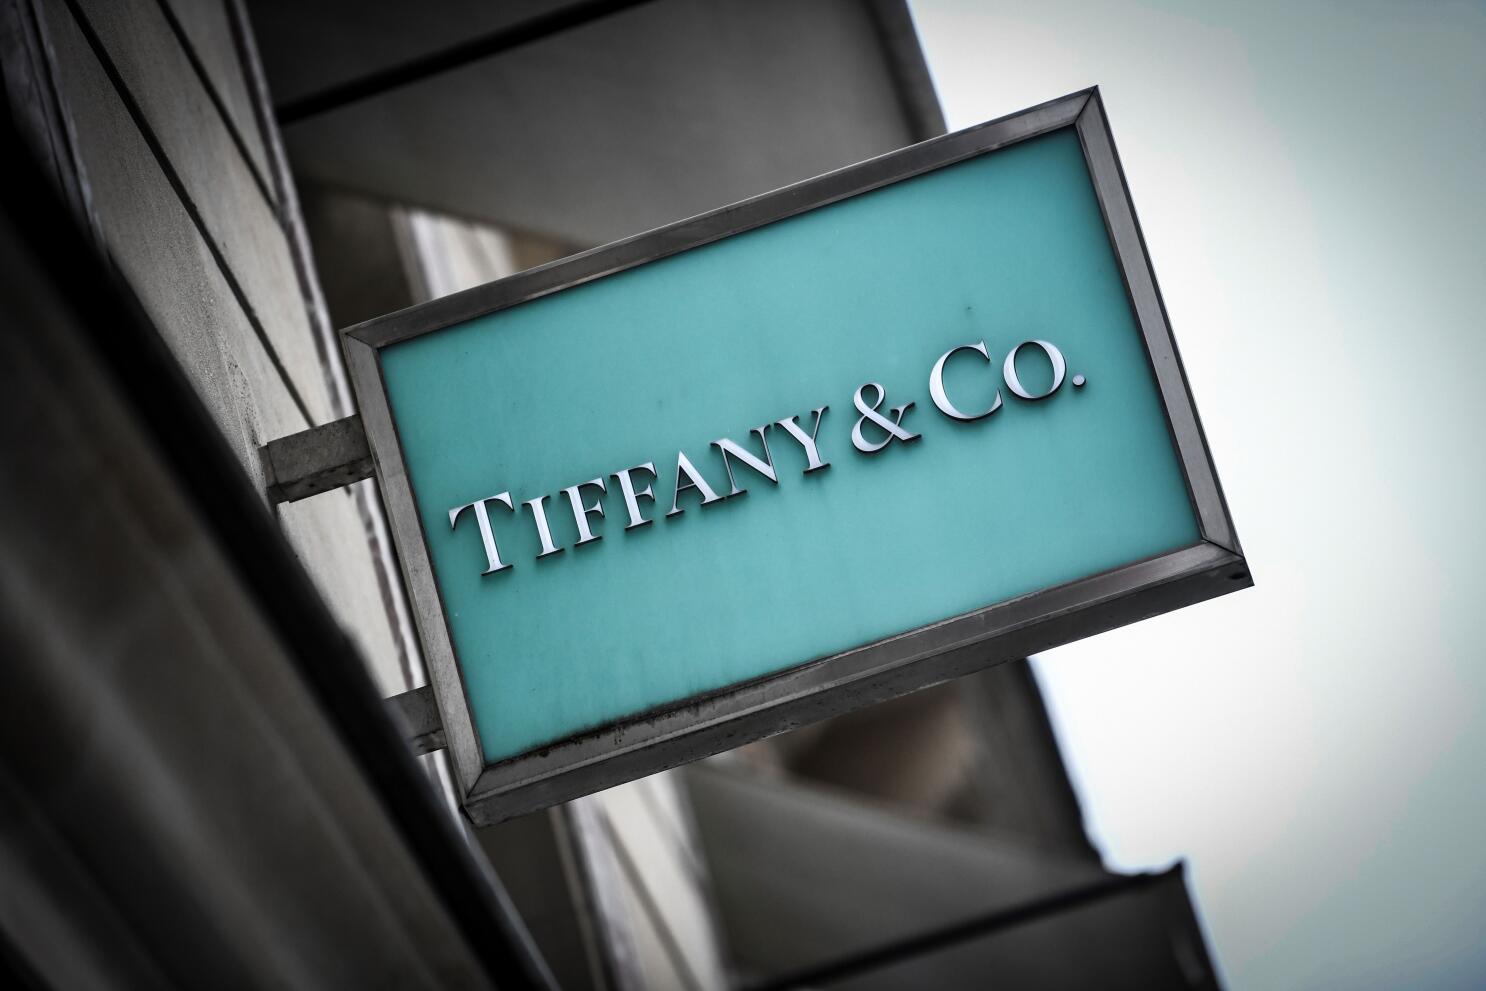 LVMH not to go ahead with Tiffany deal